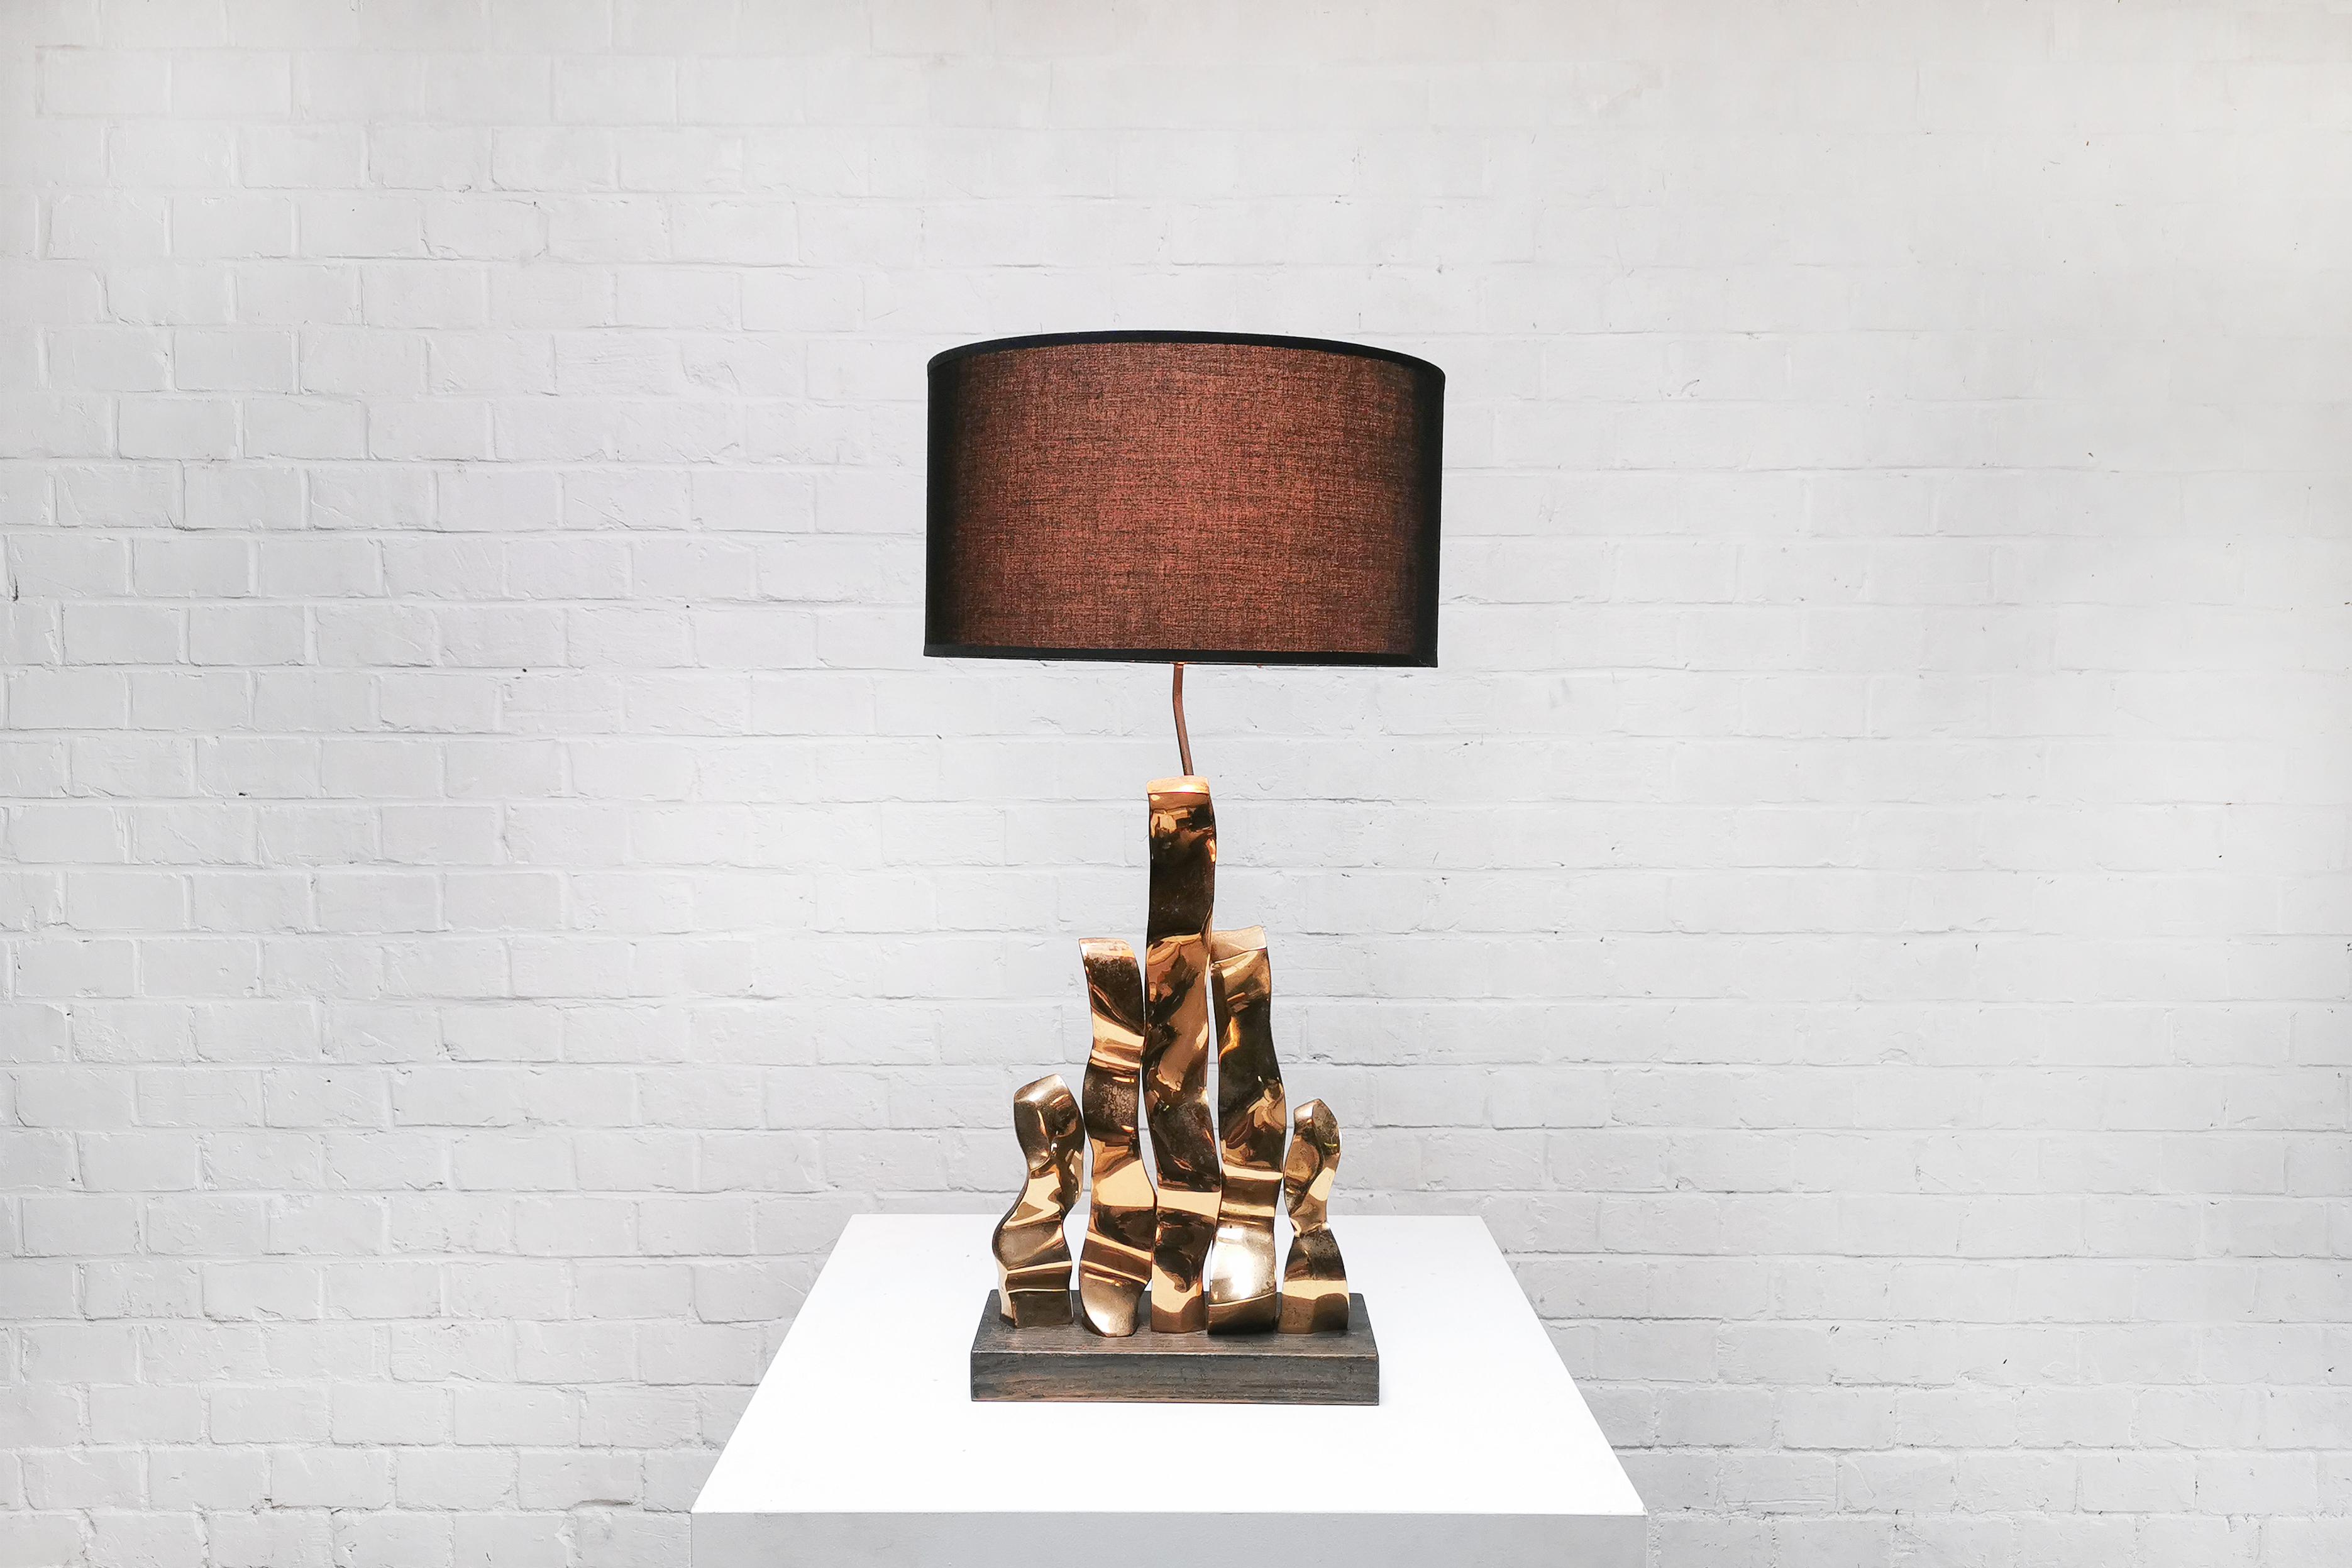 Beautiful french 1970’s table lamp with a heavy bronze sculptural base. This sculpture lamp shows a very appealing organic composition and is different in presence from every angle. It conveys the spirit of modernism from the 60’s and 70’s. The